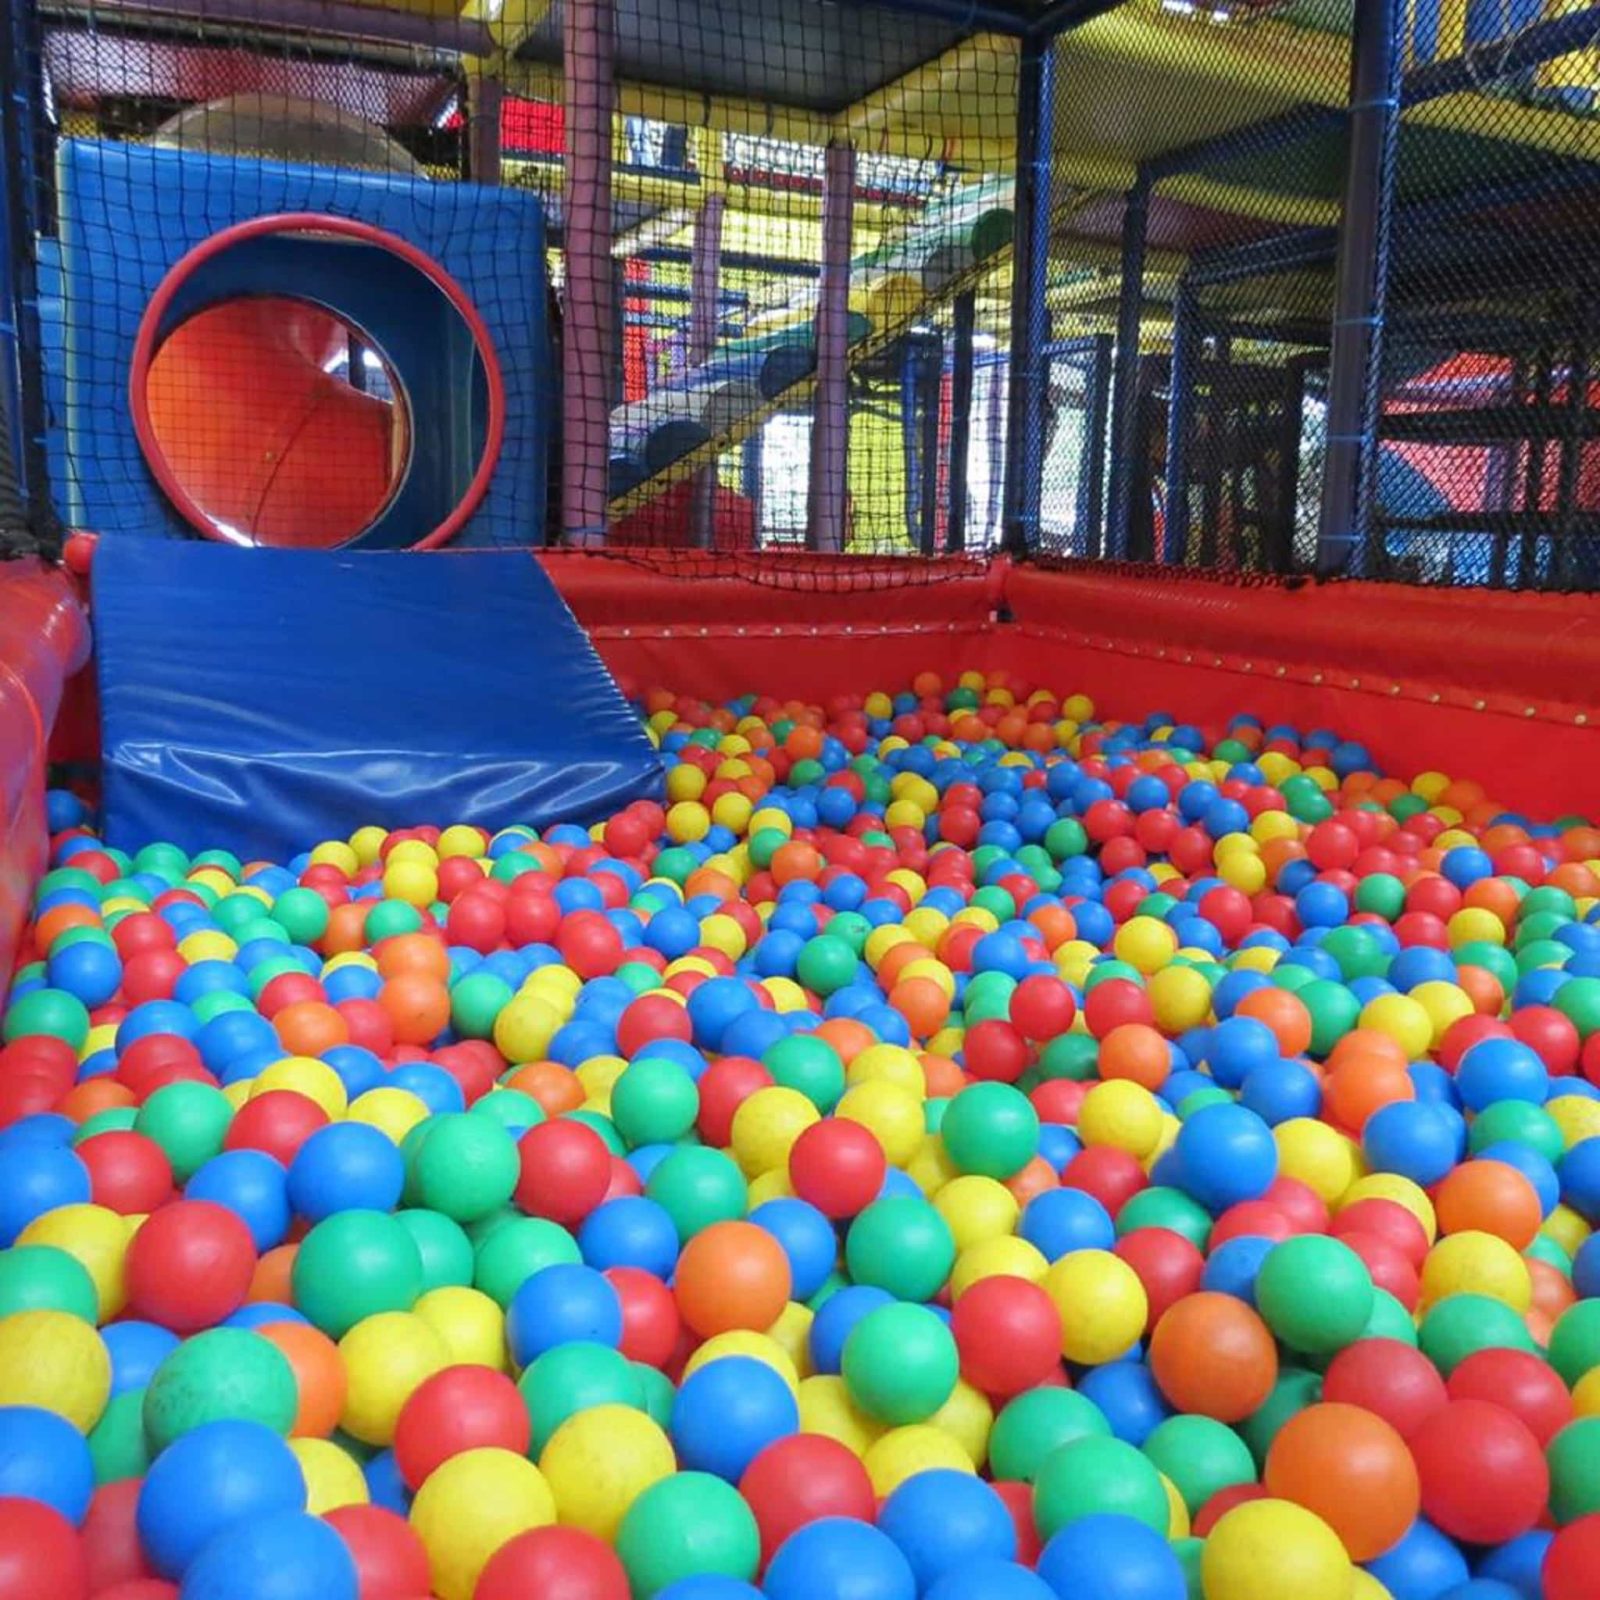 Colourful ball pit for children to play in at Playmaze Narellan